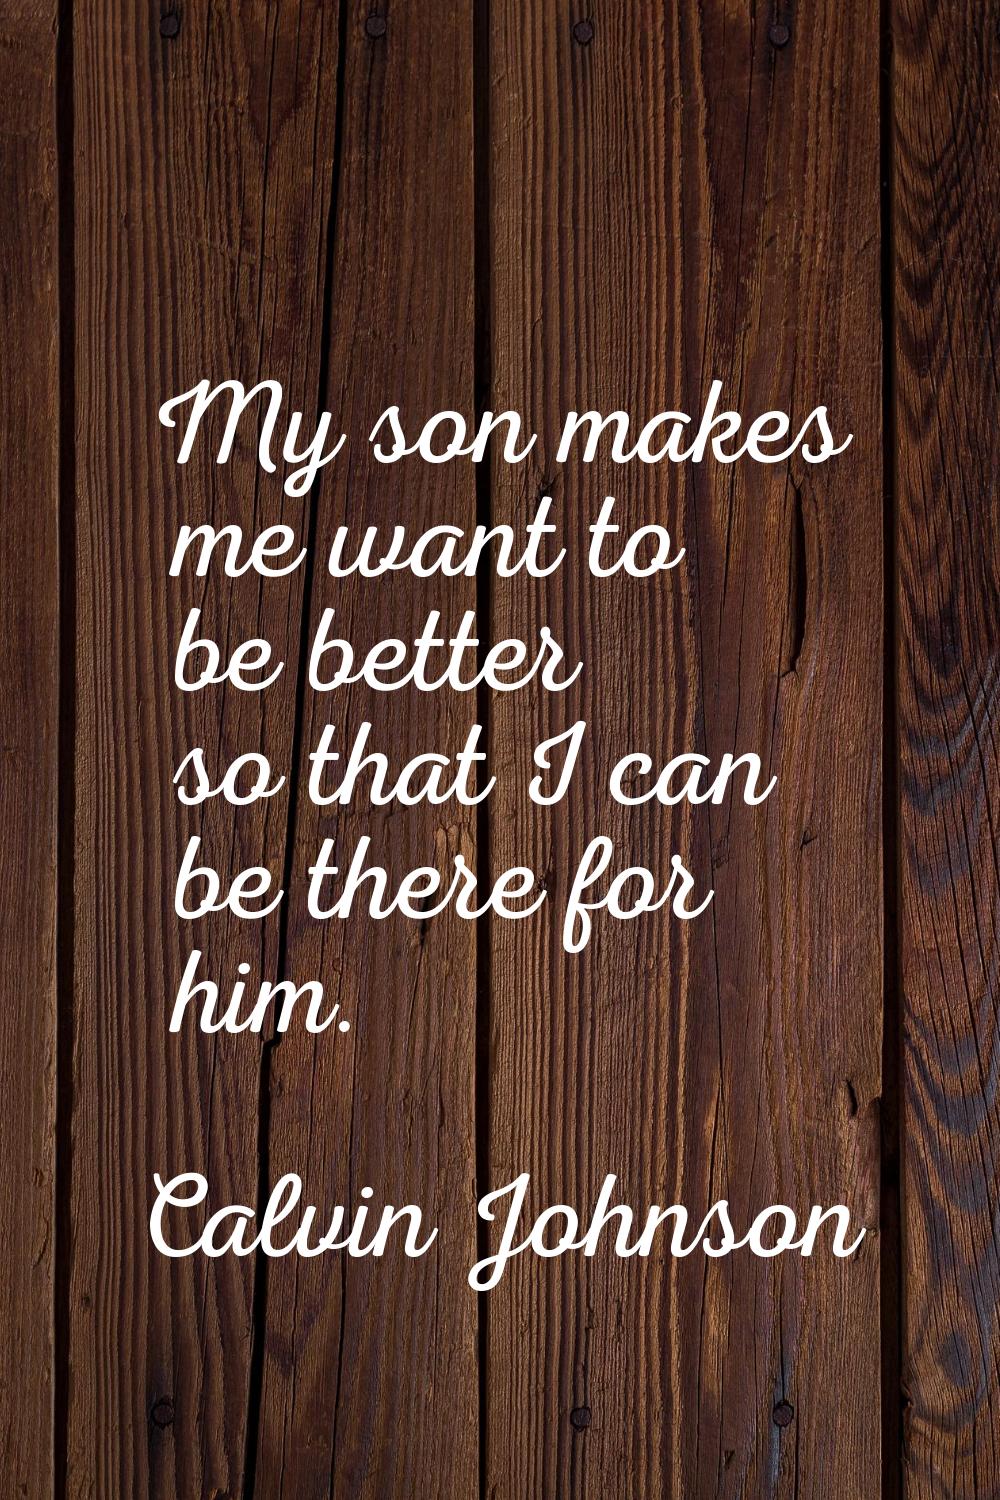 My son makes me want to be better so that I can be there for him.